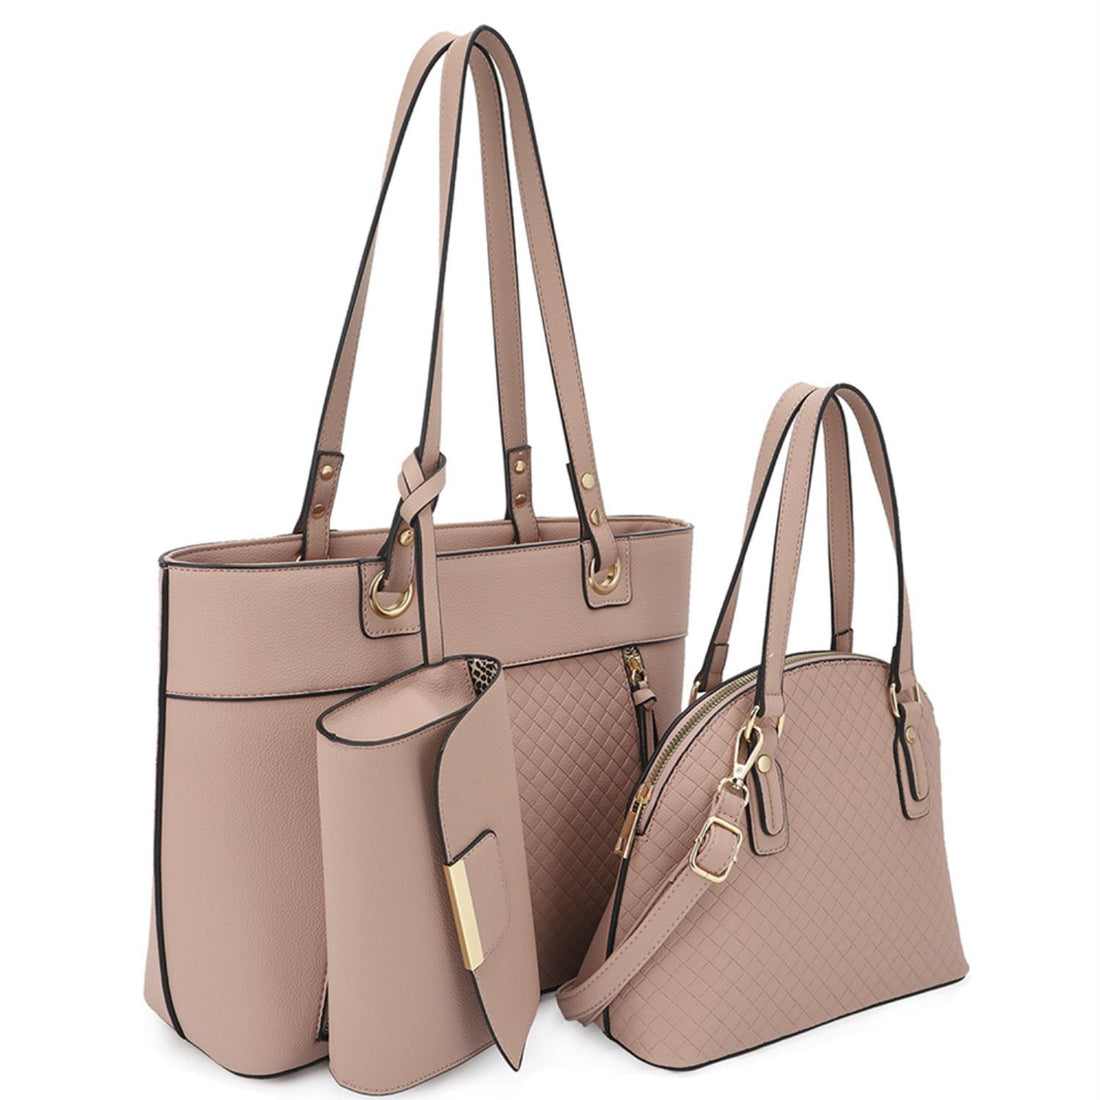 3in1 Smooth Texture Pattern Tote Bag With Handle Bag And Clutch Set - Passion 4 Fashion USA